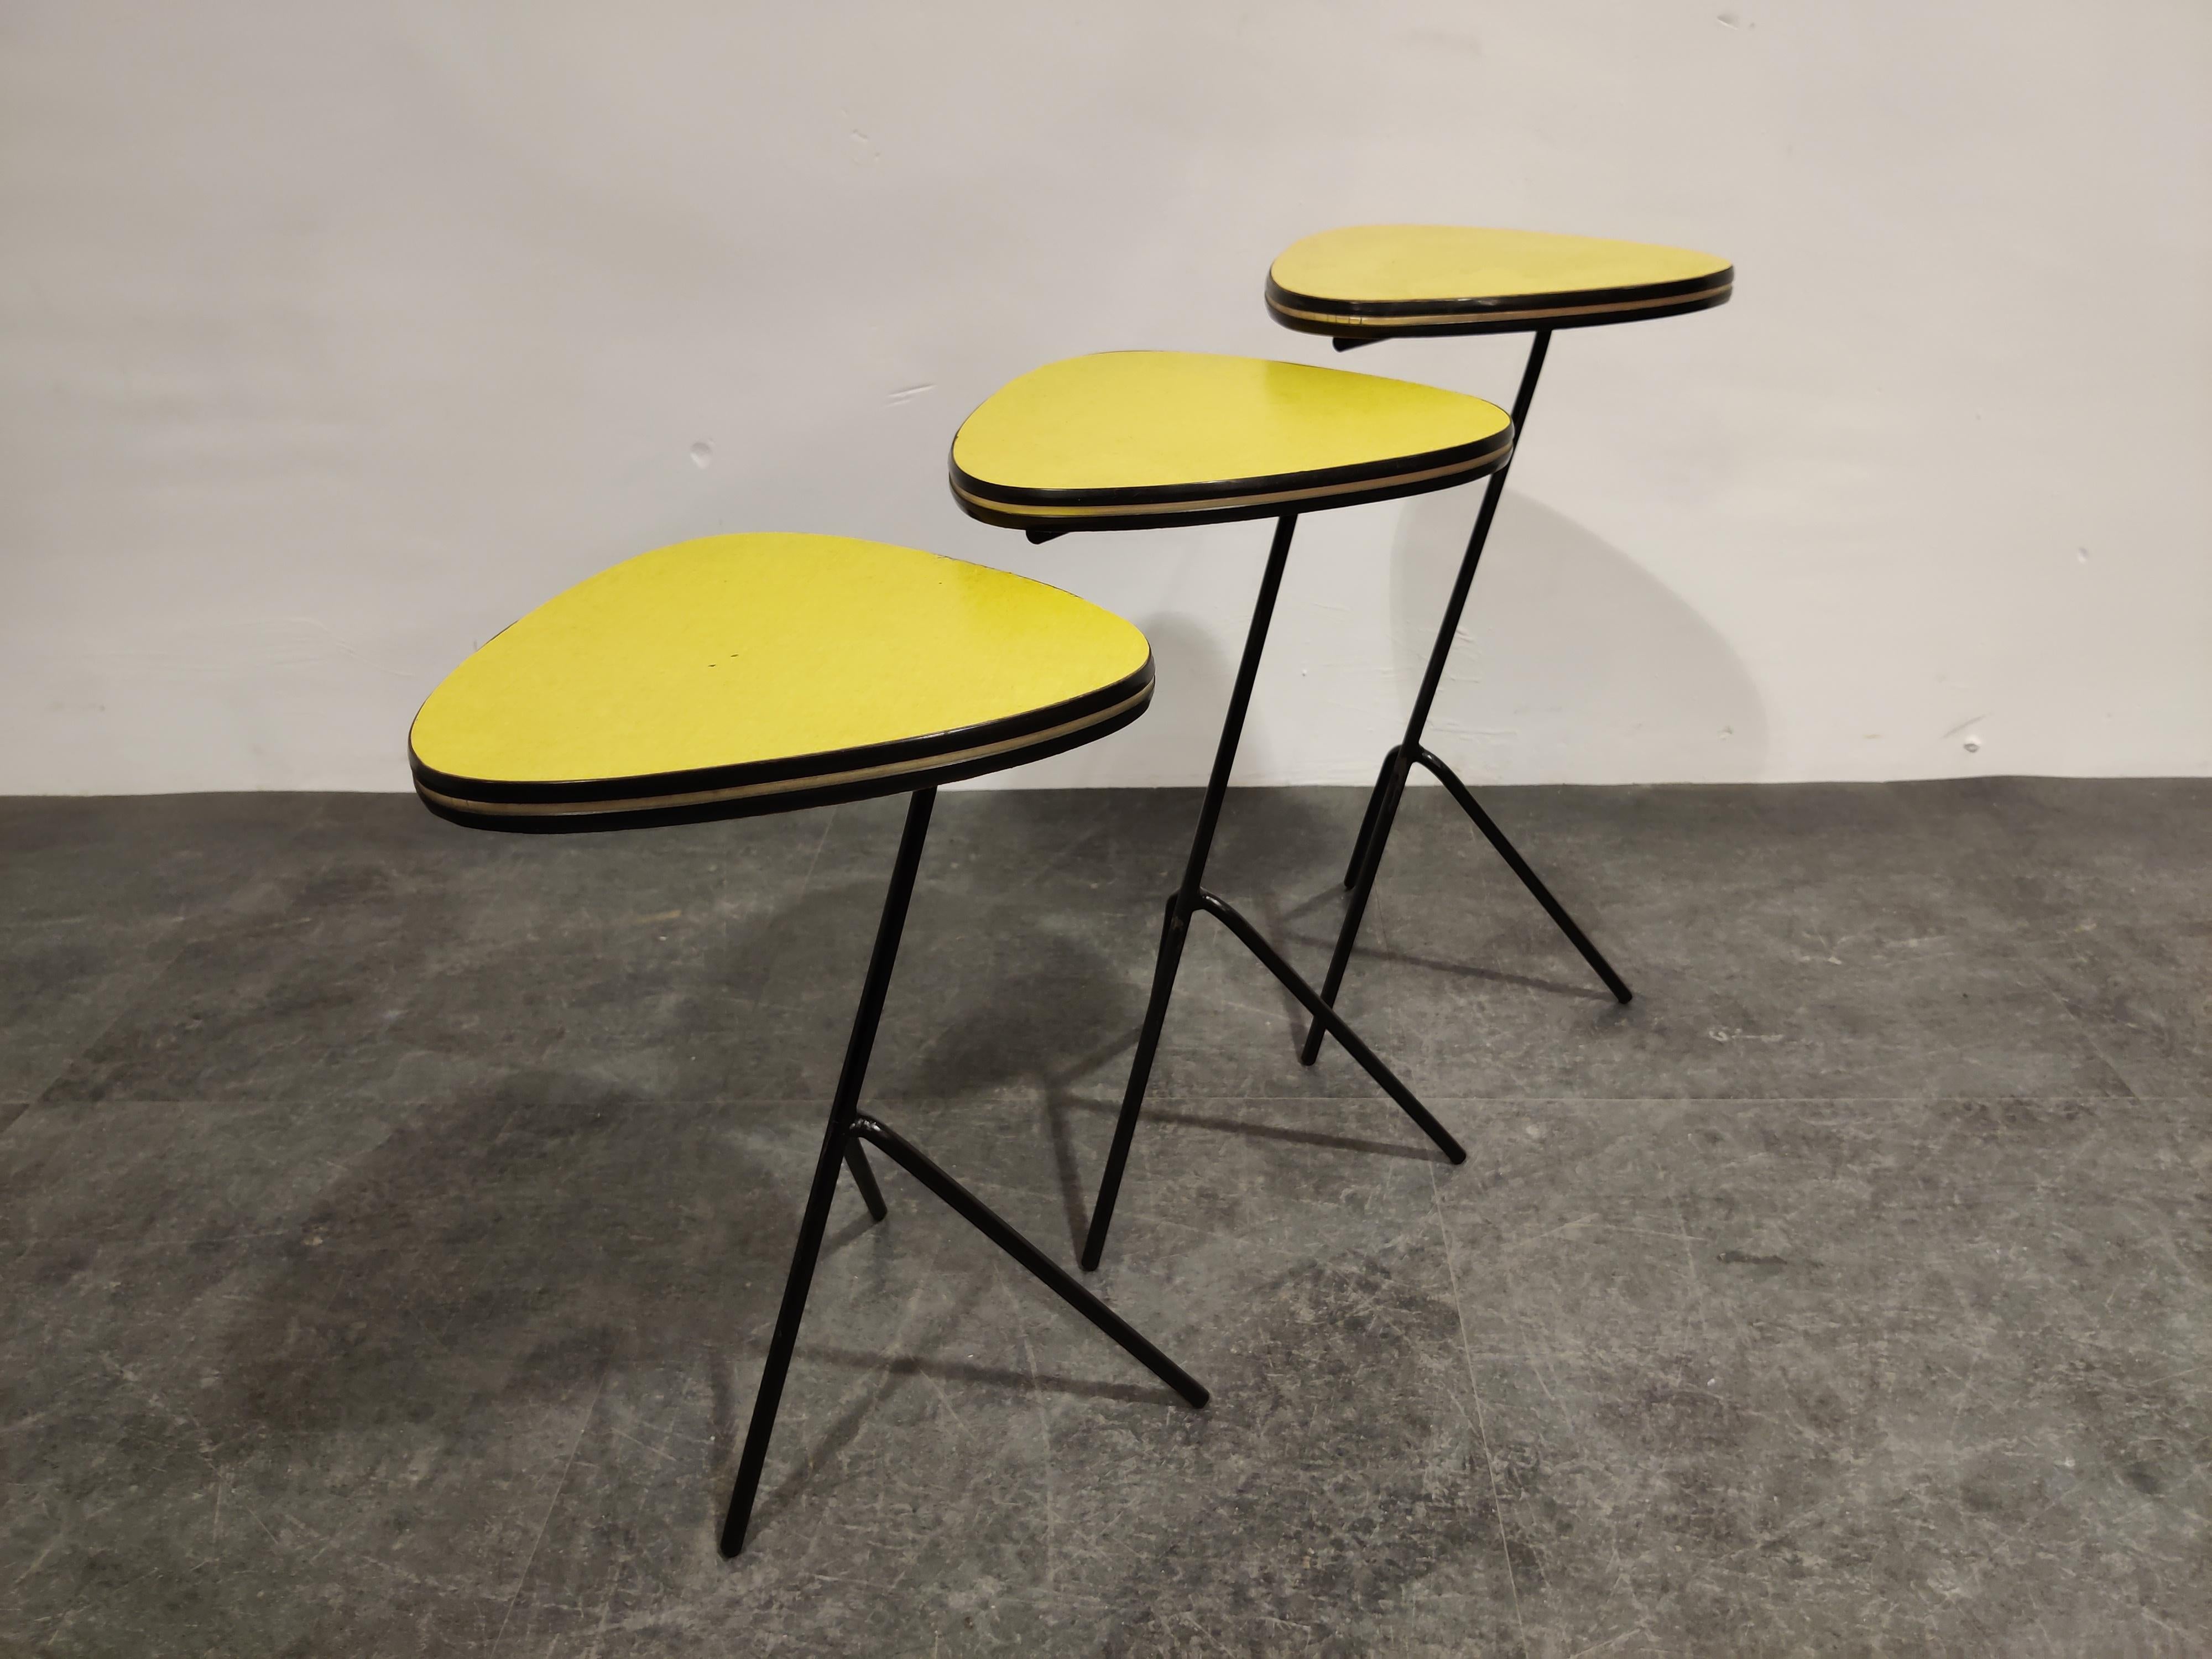 Lovely set of unusual nesting tables with beautiful tripod bases.

The table top are made of Formica and wood with a lacquered finish,

1960s, Belgium

Good condition

Dimensions of the largest table:

Height 56cm/22.04